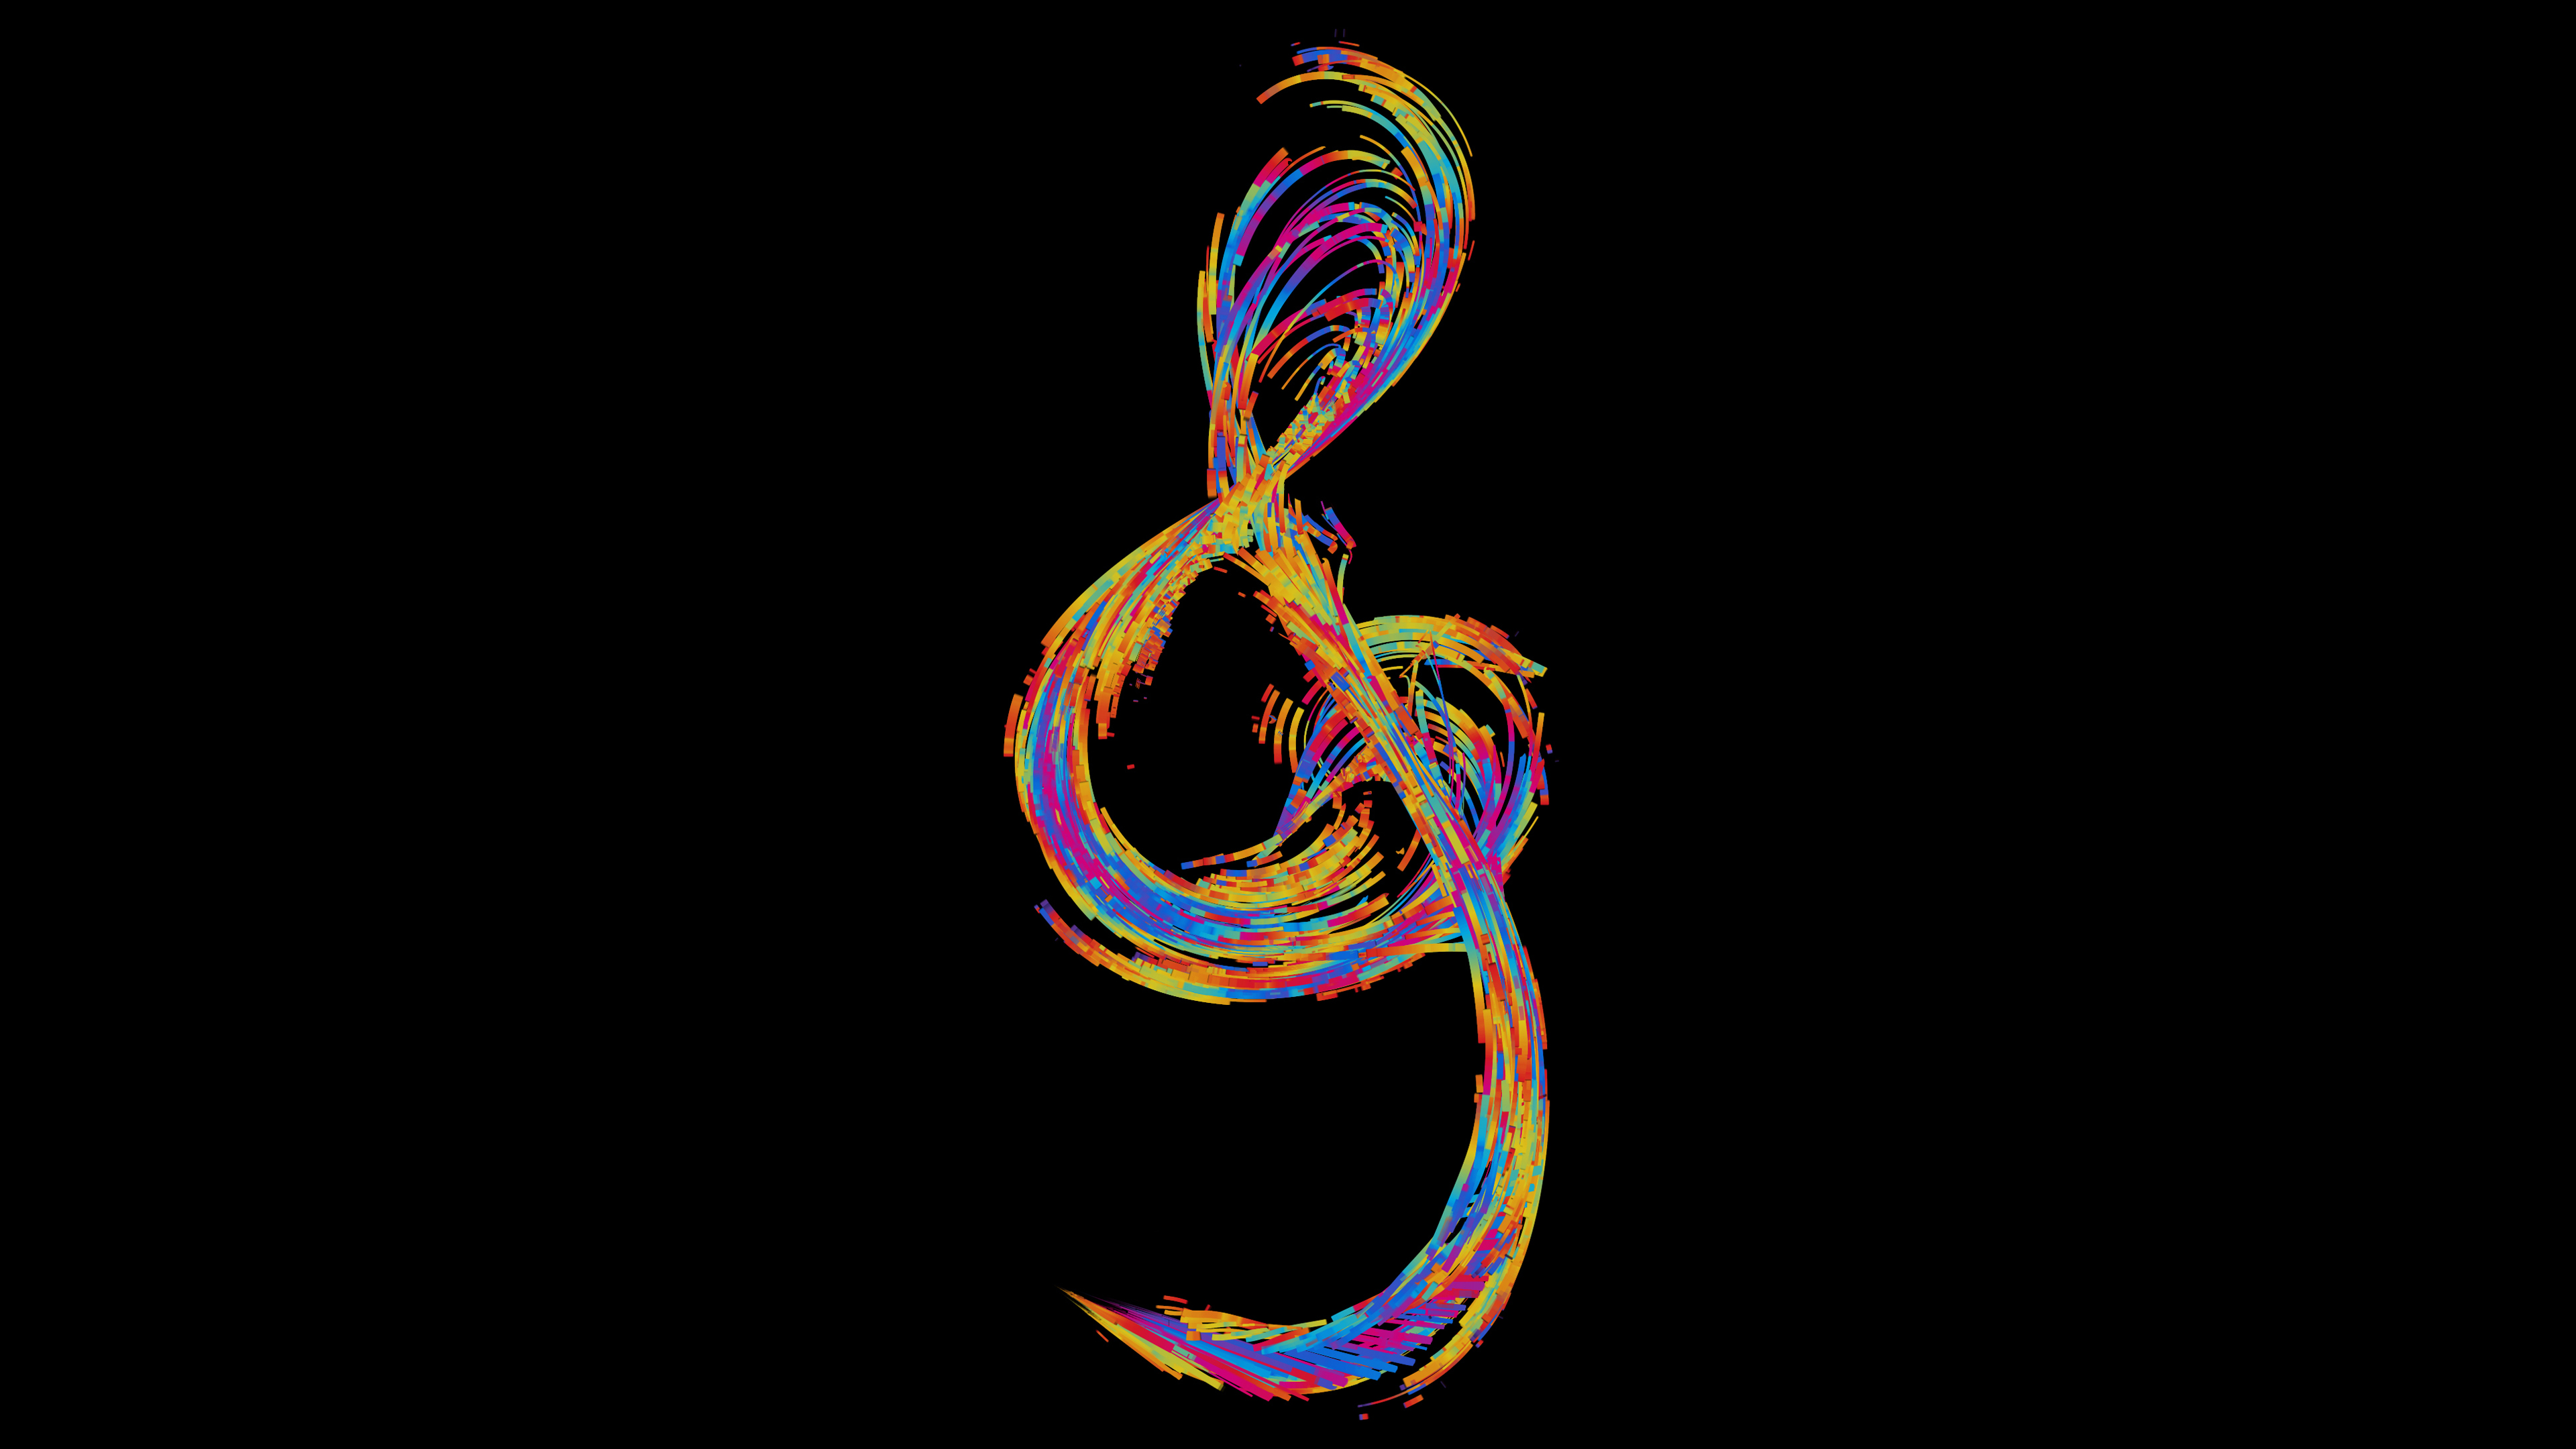 Colorful Black Background Musical Notes Digital Art Music Simple Background Minimalism 3840x2160